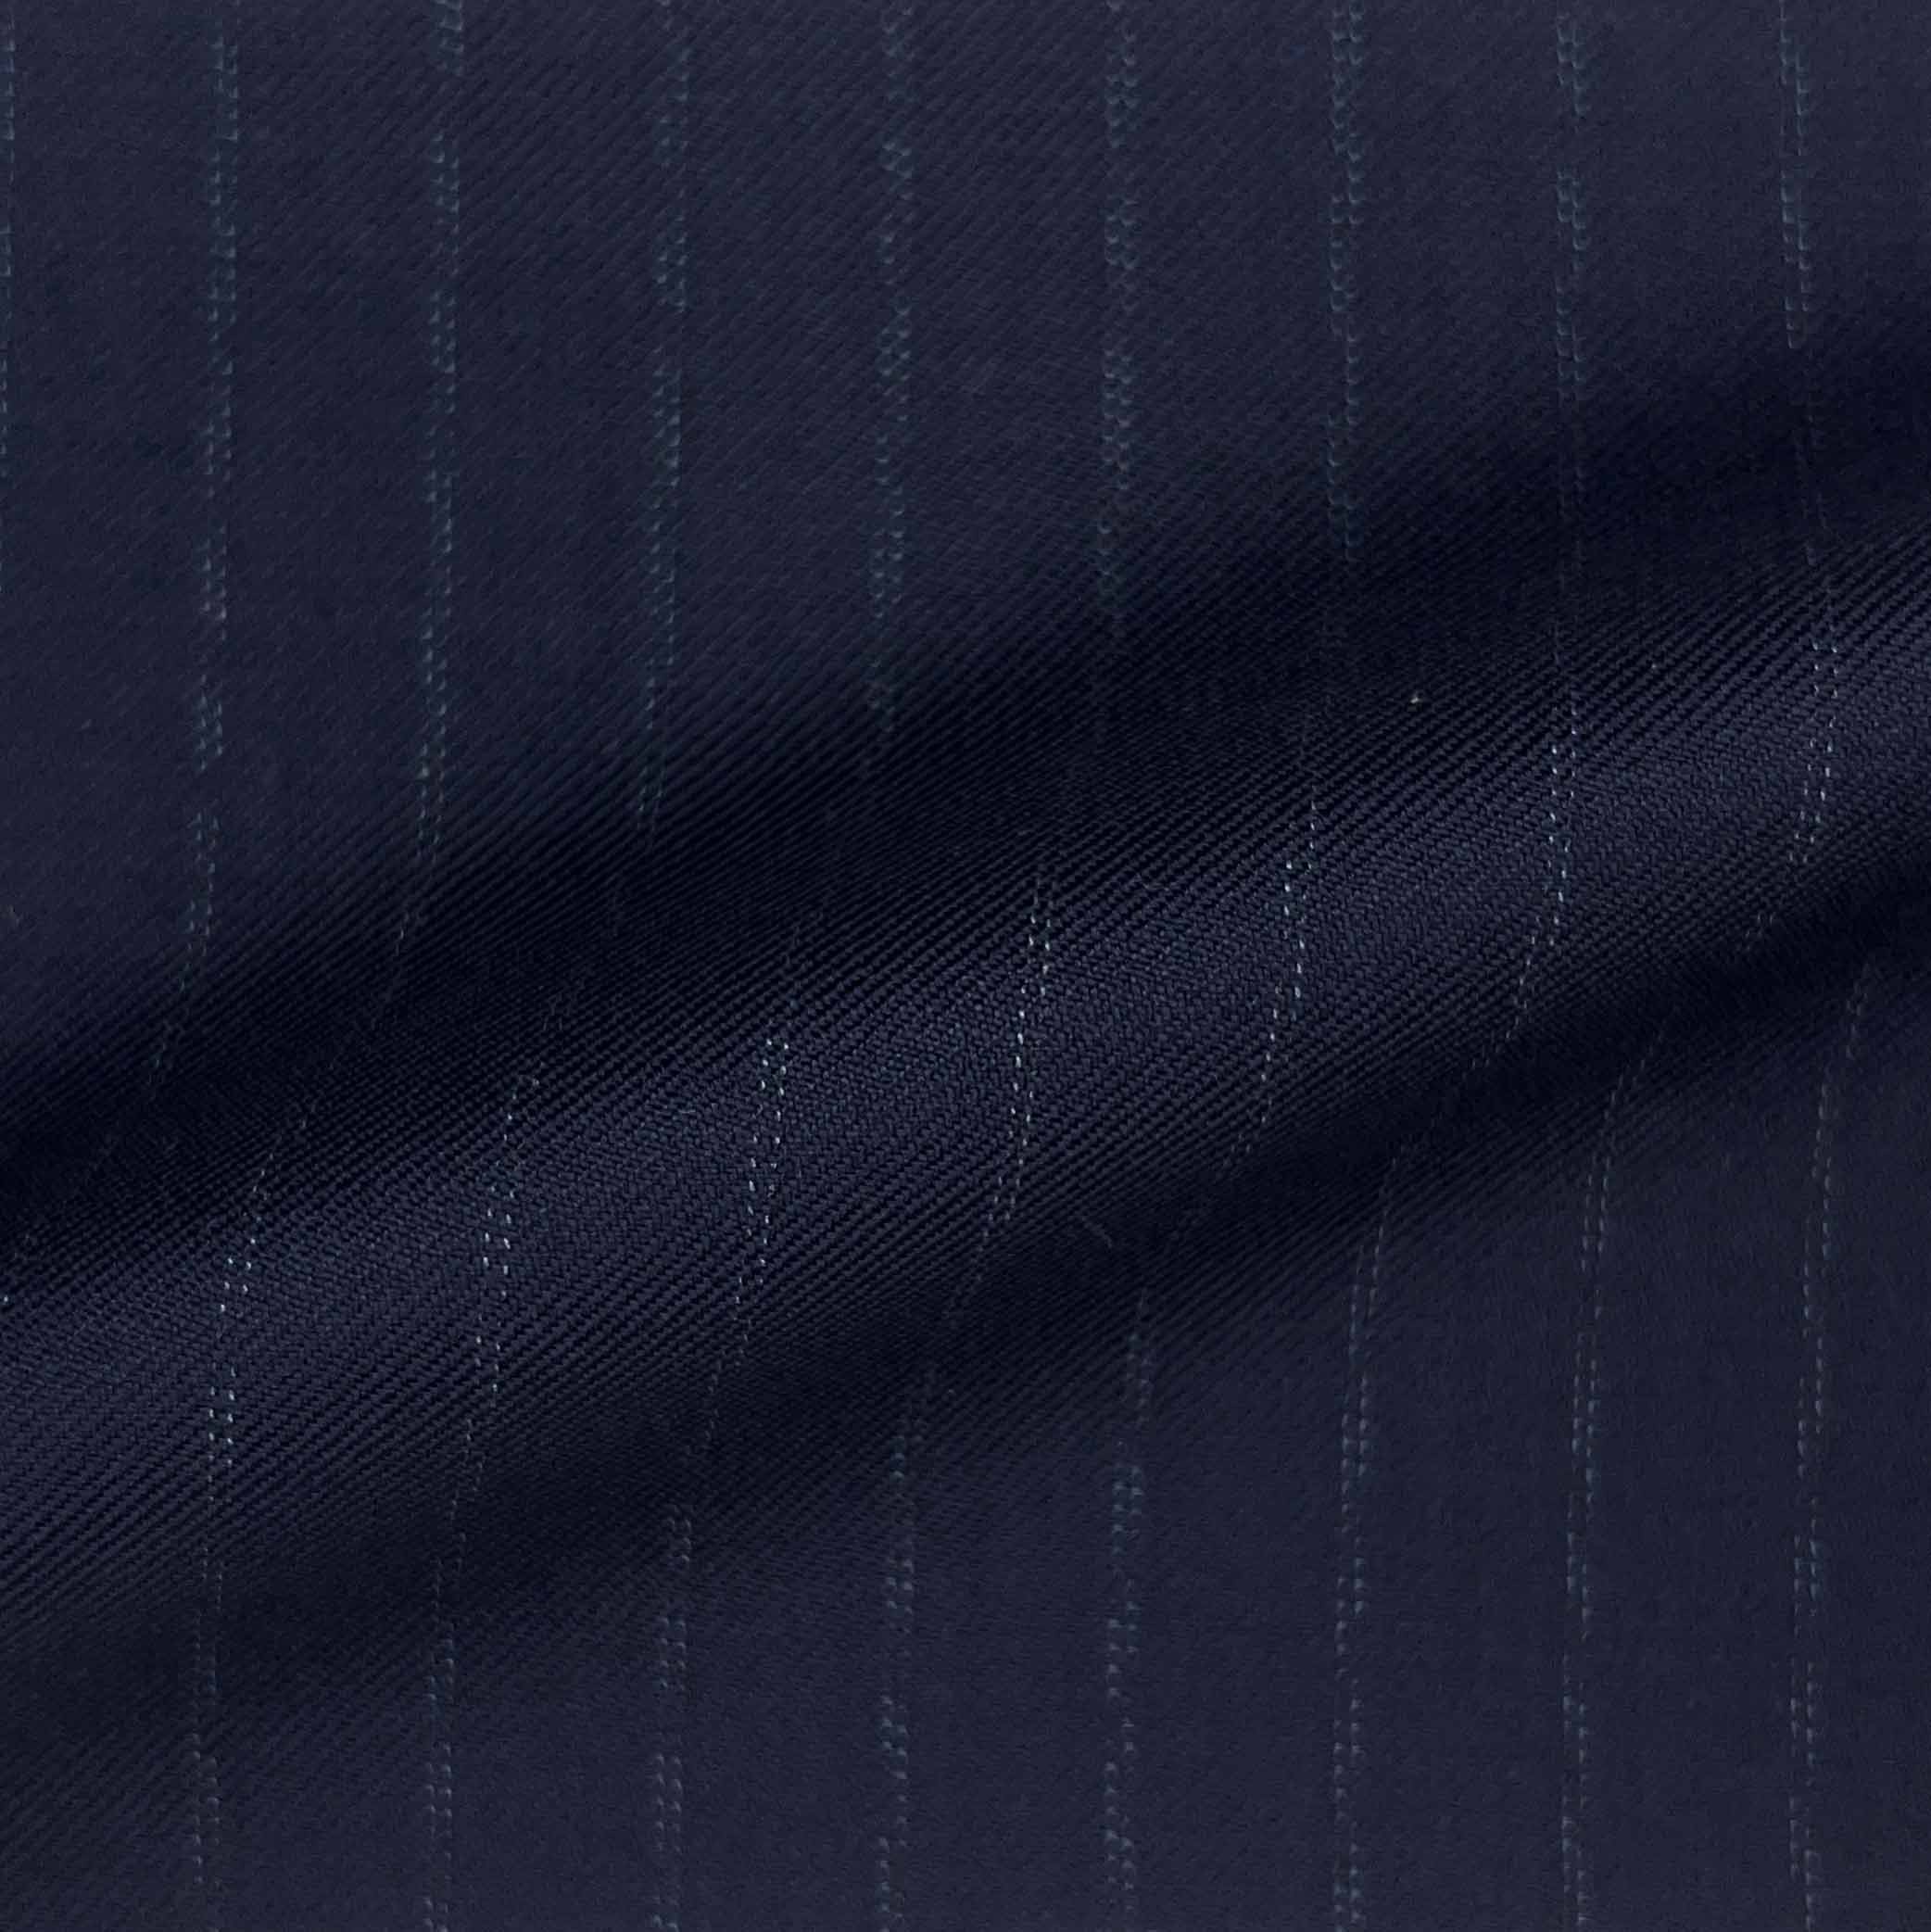 Westwood Hart Online Custom Hand Tailor Suits Sportcoats Trousers Waistcoats Overcoats Navy Blue Double Pinstripes Design